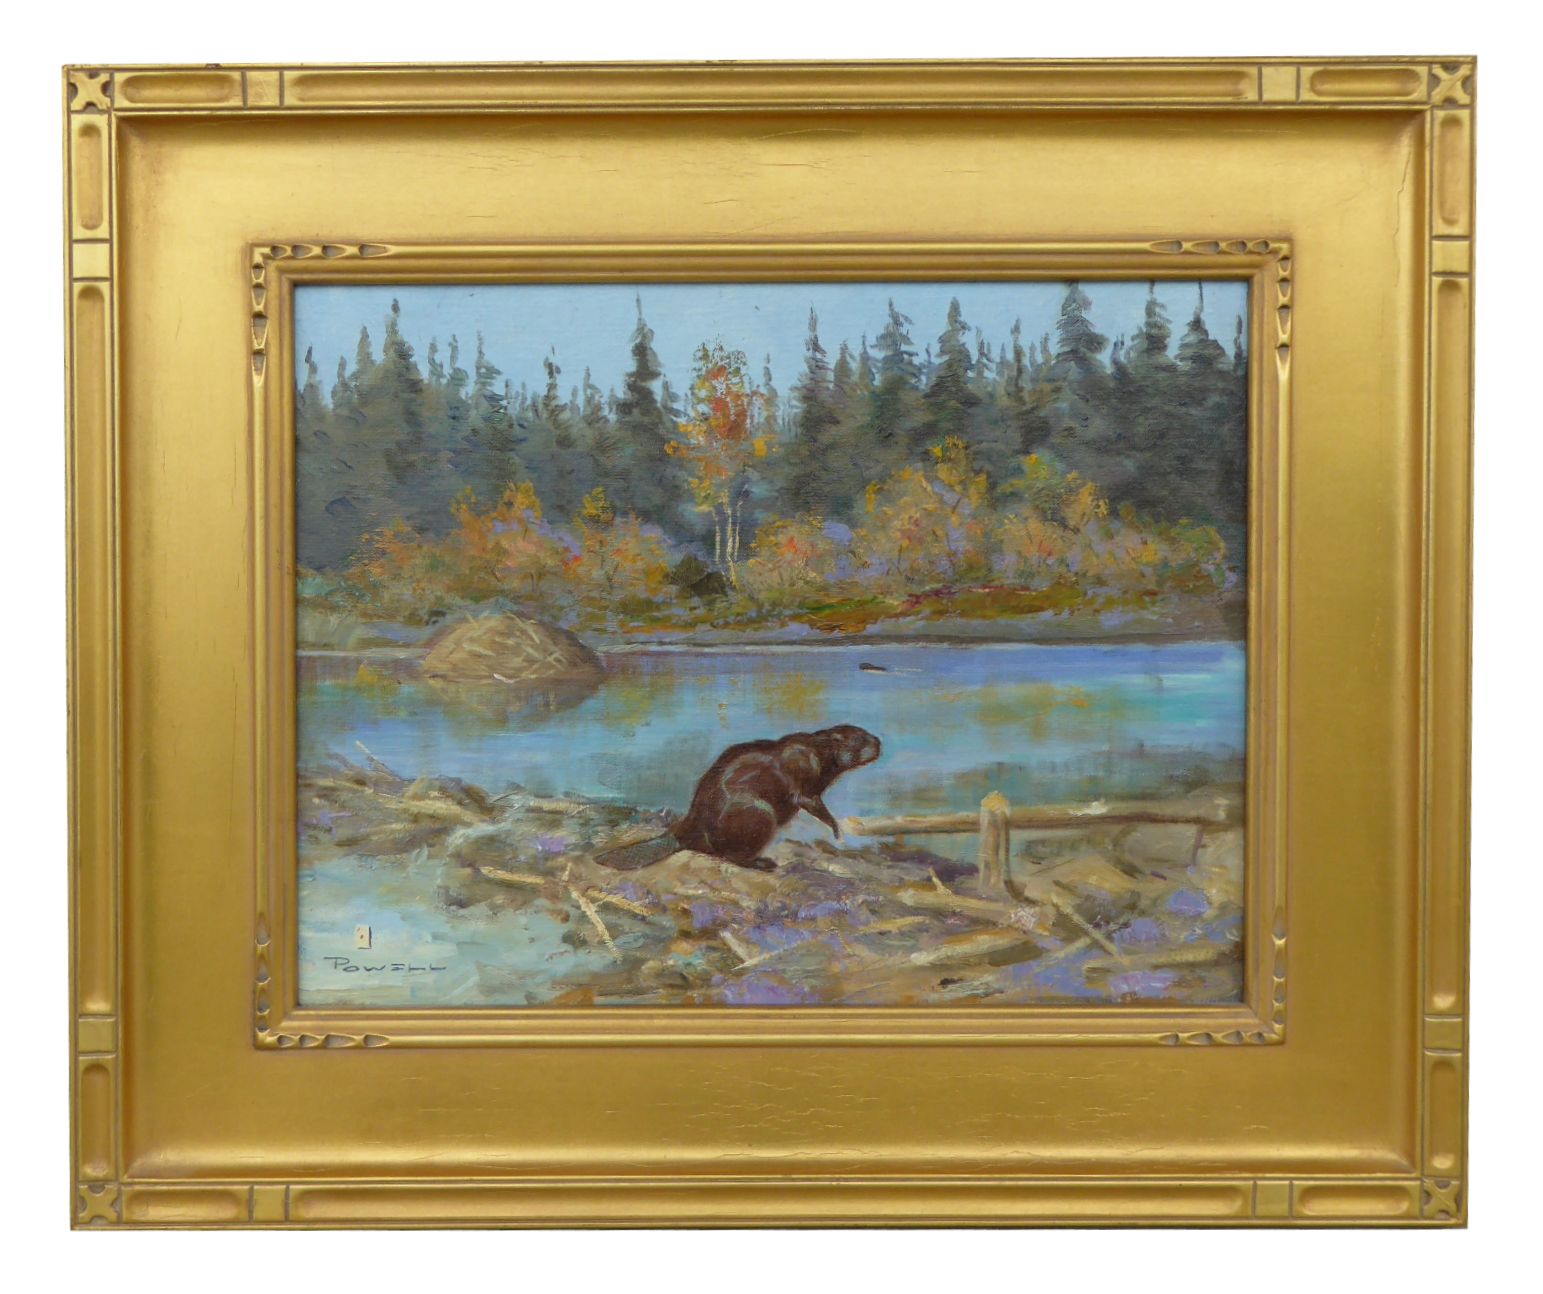 "Beaver Pond" by Ace Powell